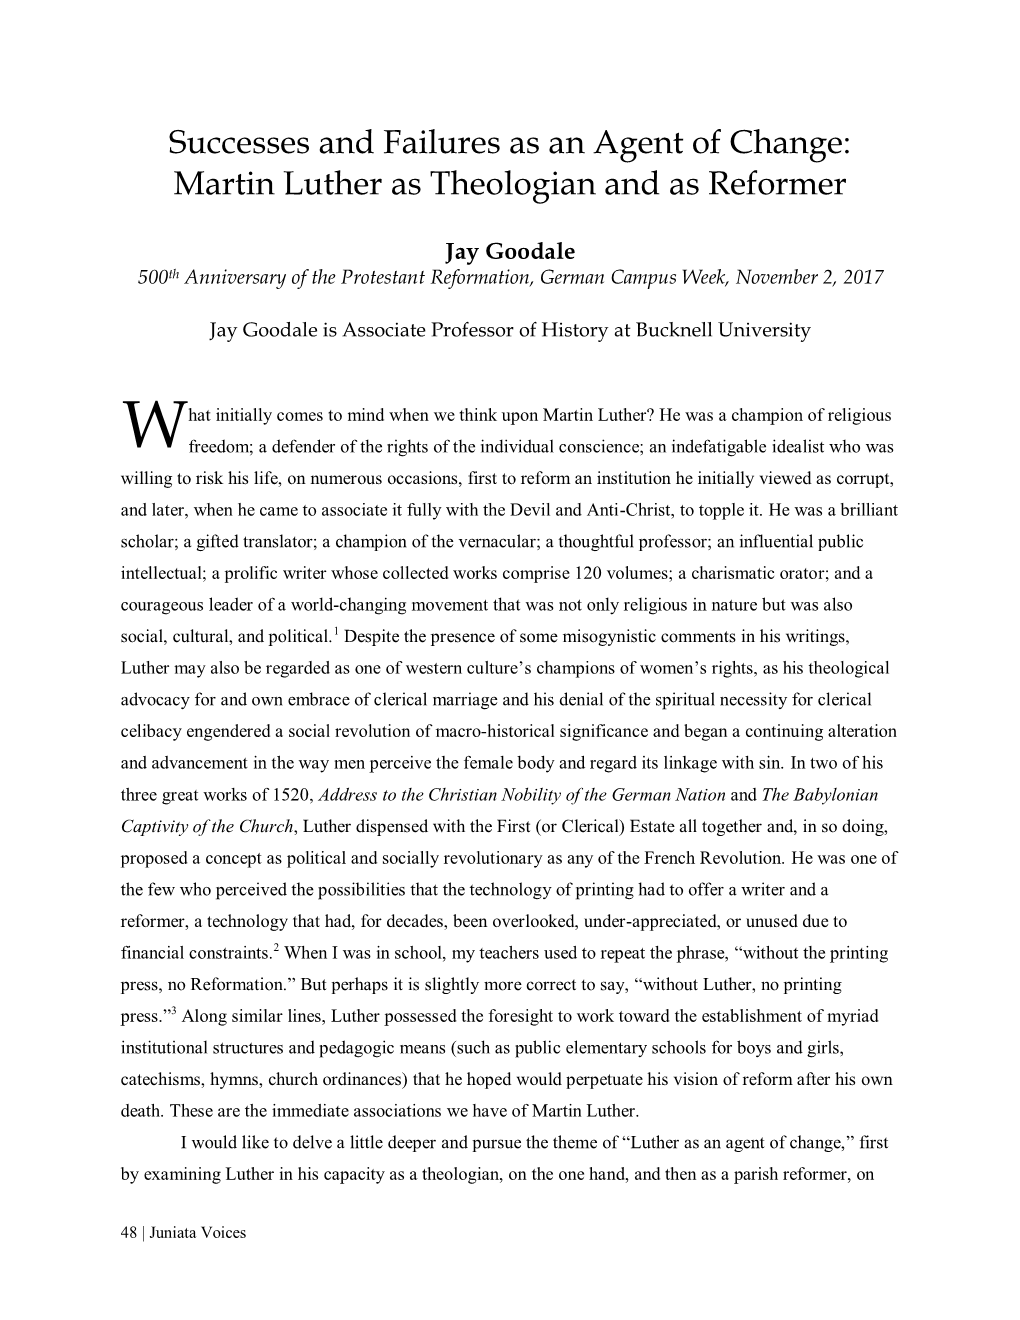 Successes and Failures As an Agent of Change: Martin Luther As Theologian and As Reformer